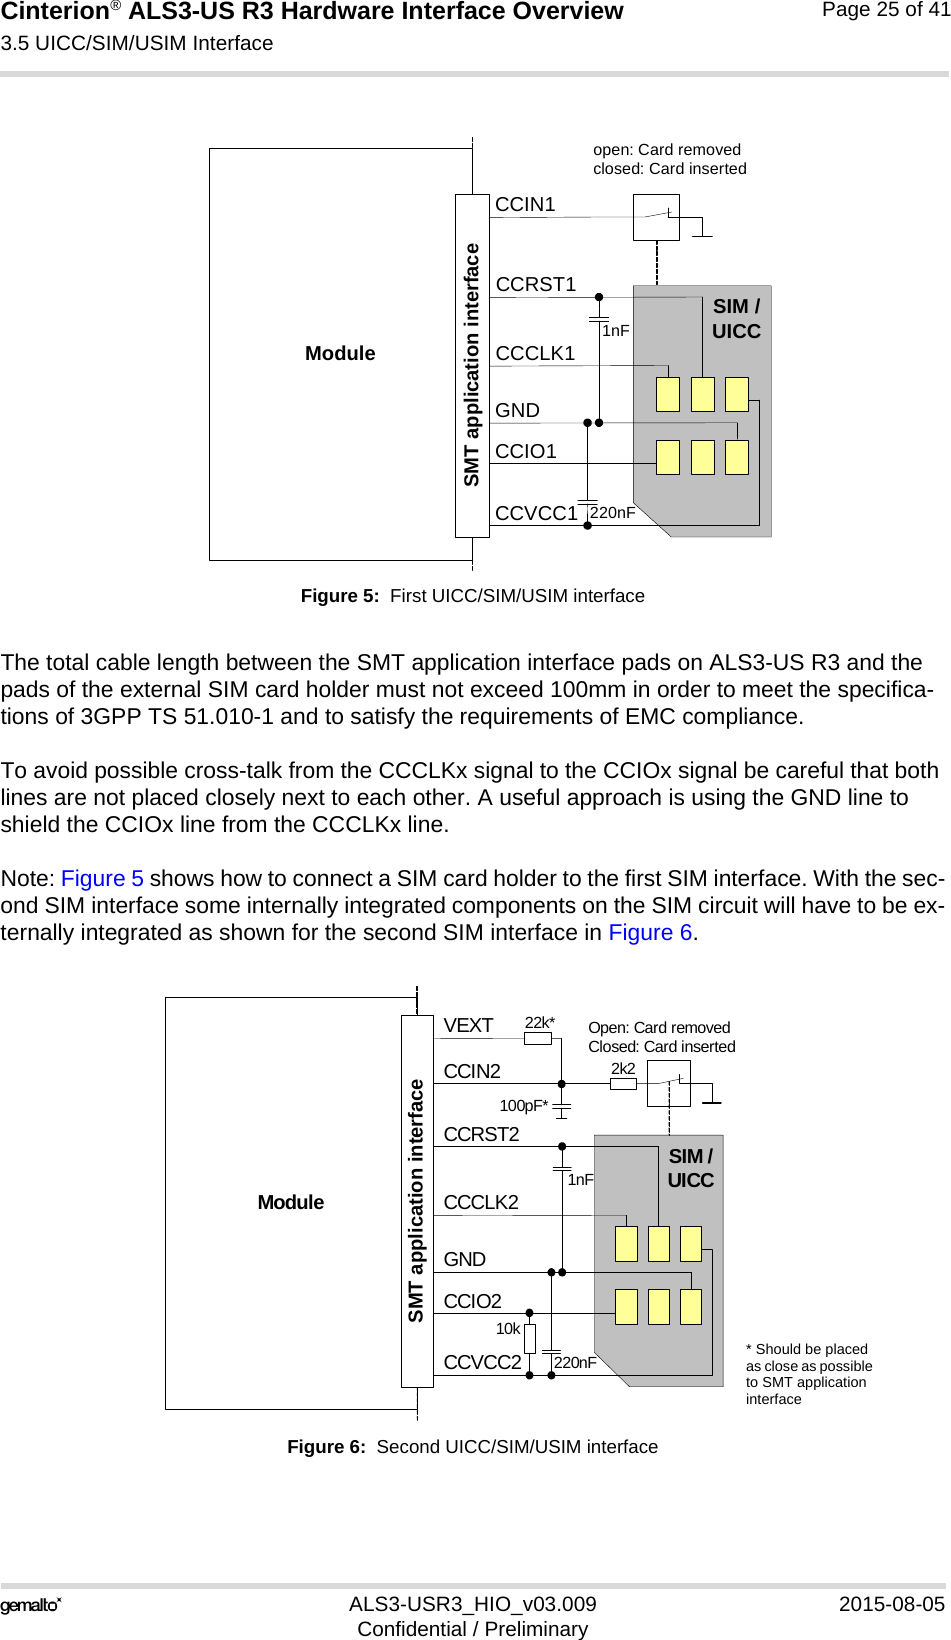 Cinterion® ALS3-US R3 Hardware Interface Overview3.5 UICC/SIM/USIM Interface27ALS3-USR3_HIO_v03.009 2015-08-05Confidential / PreliminaryPage 25 of 41Figure 5:  First UICC/SIM/USIM interfaceThe total cable length between the SMT application interface pads on ALS3-US R3 and the pads of the external SIM card holder must not exceed 100mm in order to meet the specifica-tions of 3GPP TS 51.010-1 and to satisfy the requirements of EMC compliance.To avoid possible cross-talk from the CCCLKx signal to the CCIOx signal be careful that both lines are not placed closely next to each other. A useful approach is using the GND line to shield the CCIOx line from the CCCLKx line.Note: Figure 5 shows how to connect a SIM card holder to the first SIM interface. With the sec-ond SIM interface some internally integrated components on the SIM circuit will have to be ex-ternally integrated as shown for the second SIM interface in Figure 6.Figure 6:  Second UICC/SIM/USIM interfaceModuleopen: Card removedclosed: Card insertedCCRST1CCVCC1CCIO1CCCLK1CCIN1SIM /UICC1nF220nFSMT application interfaceGNDModuleOpen: Card removedClosed: Card insertedCCRST2CCVCC2CCIO2CCCLK2CCIN2SIM /UICC1nF220nFSMT application interfaceGND2k2100pF*VEXT 22k*10k* Should be placed as close as possible to SMT application interface